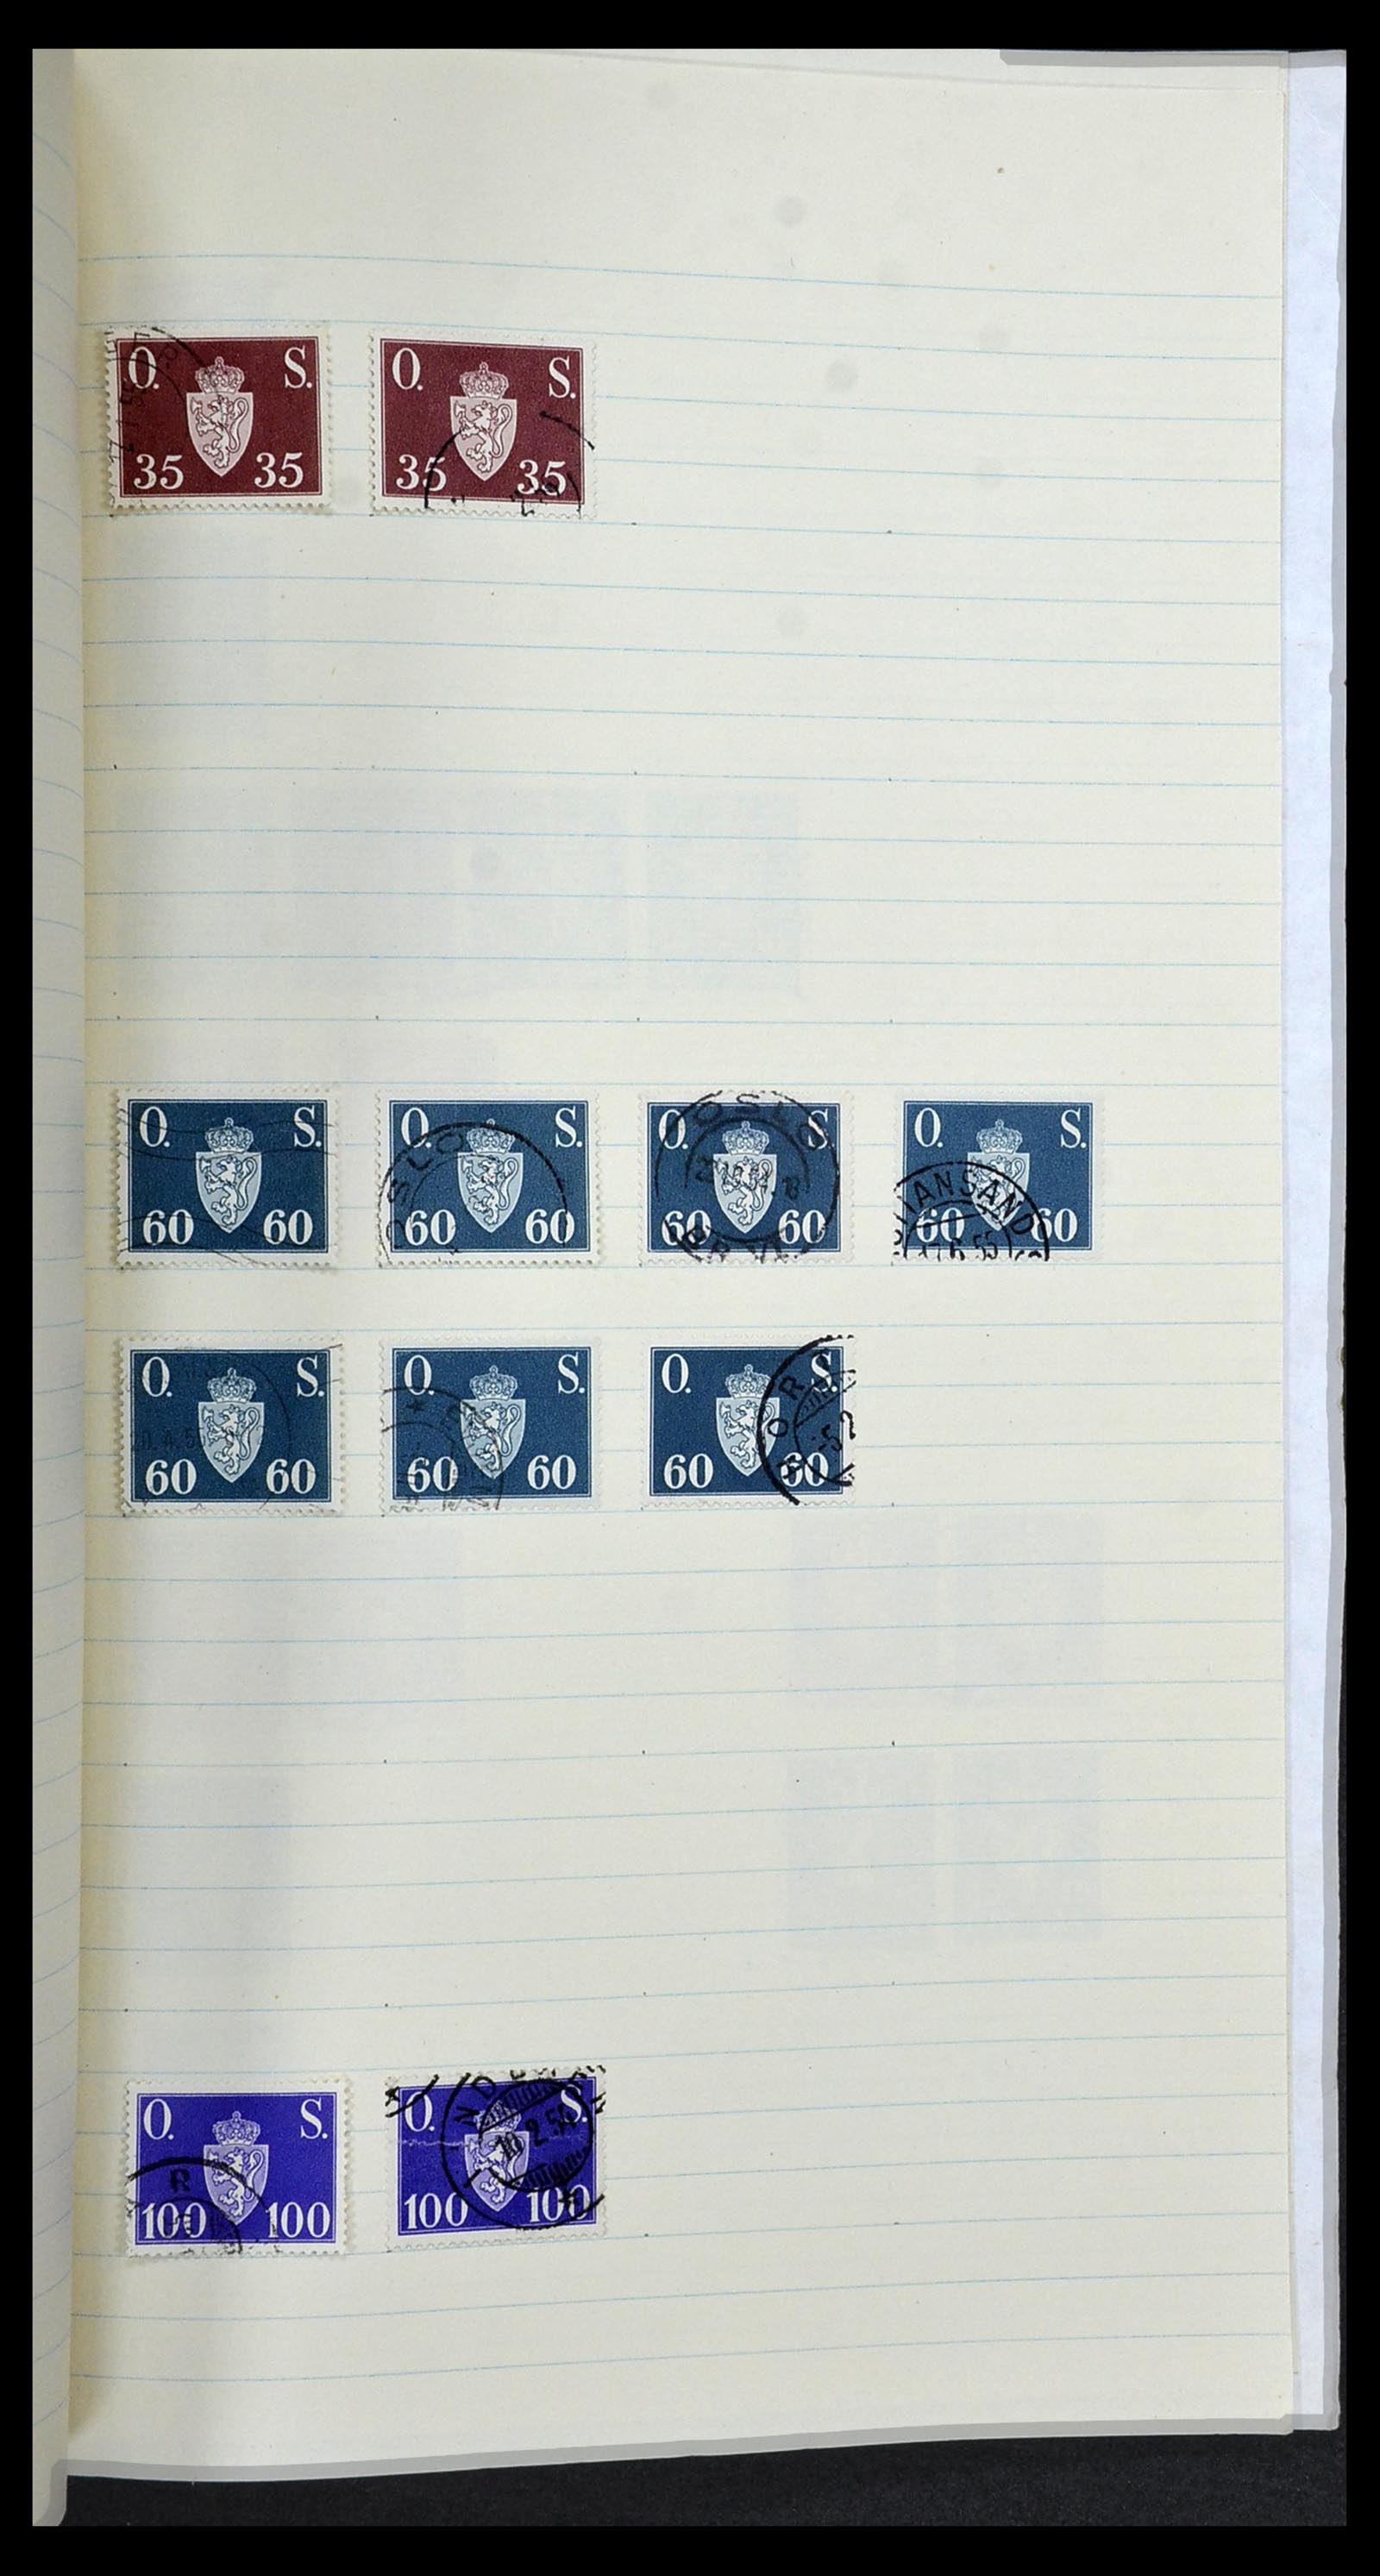 34233 088 - Stamp collection 34233 Norway 1856-1970.